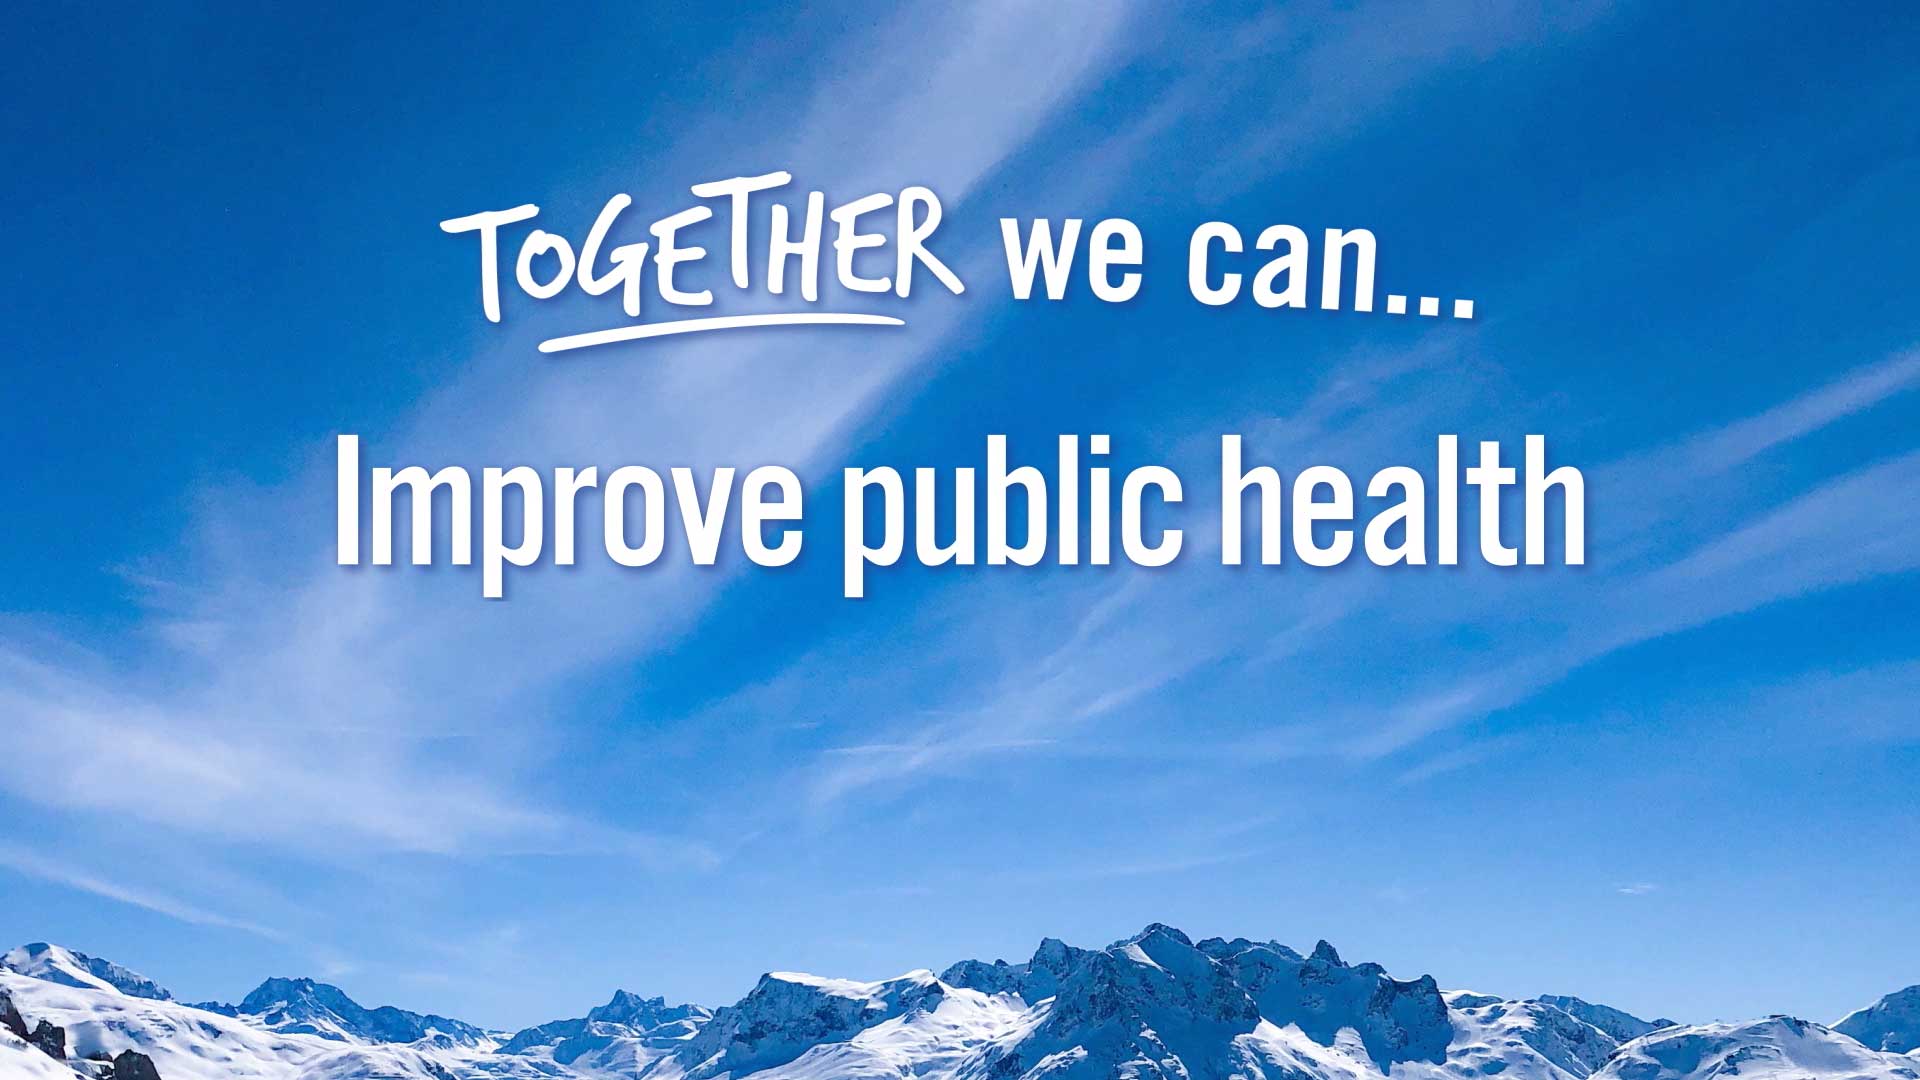 Video cover graphic of a clear sky above snow-covered mountains with text saying "Together we can...Improve public health"